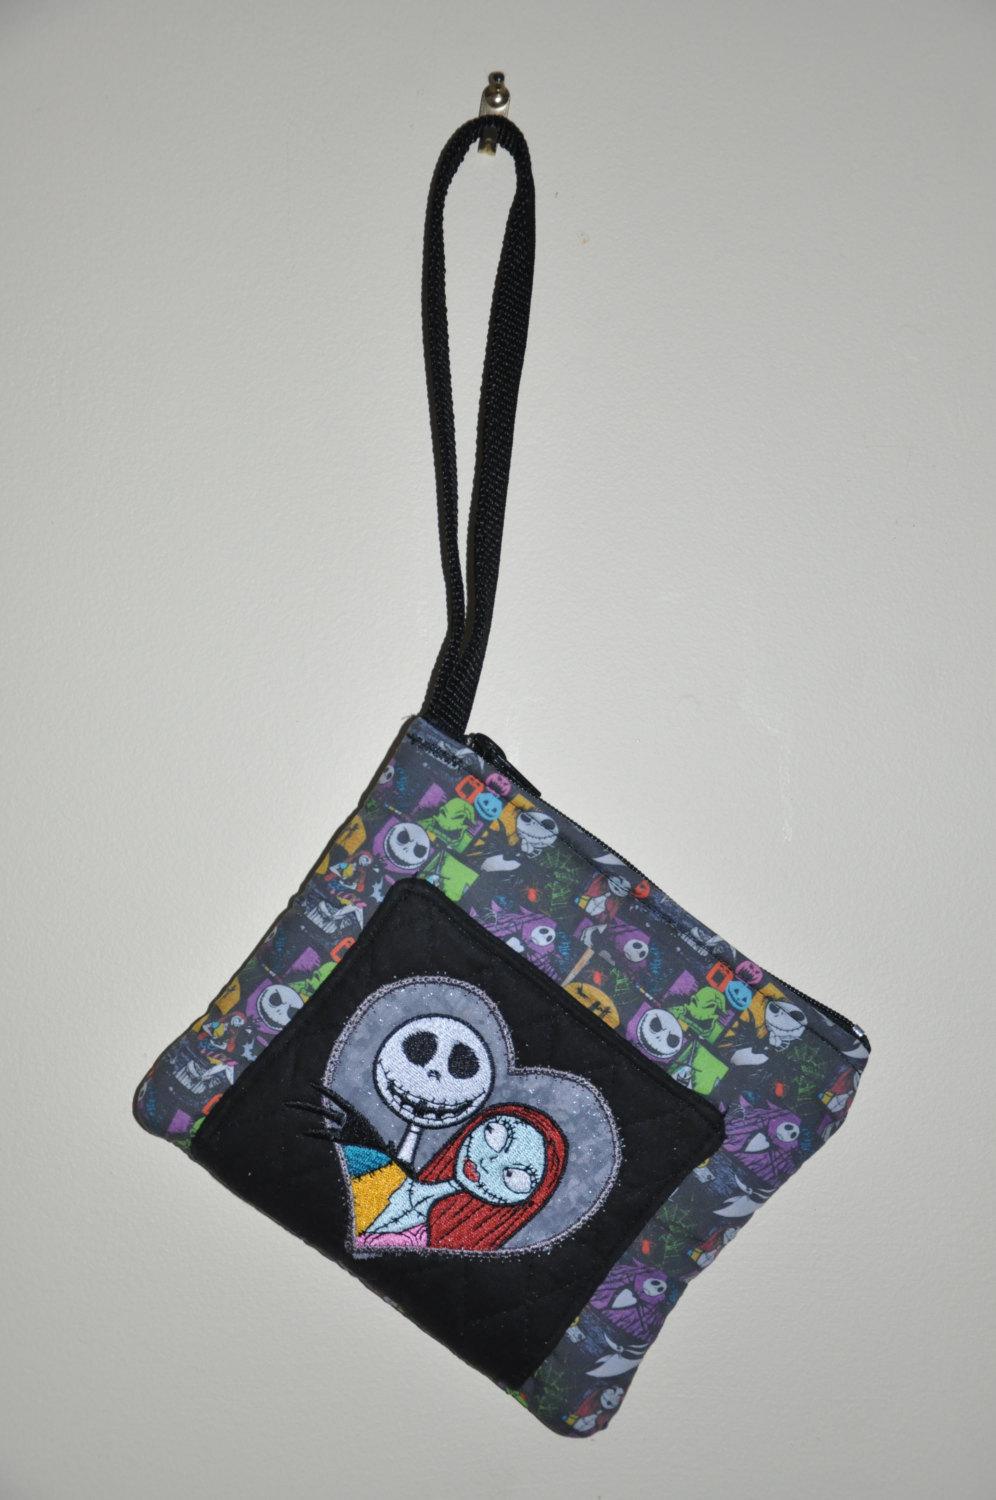 A purse with Jack Skellington and Sally embroidery design